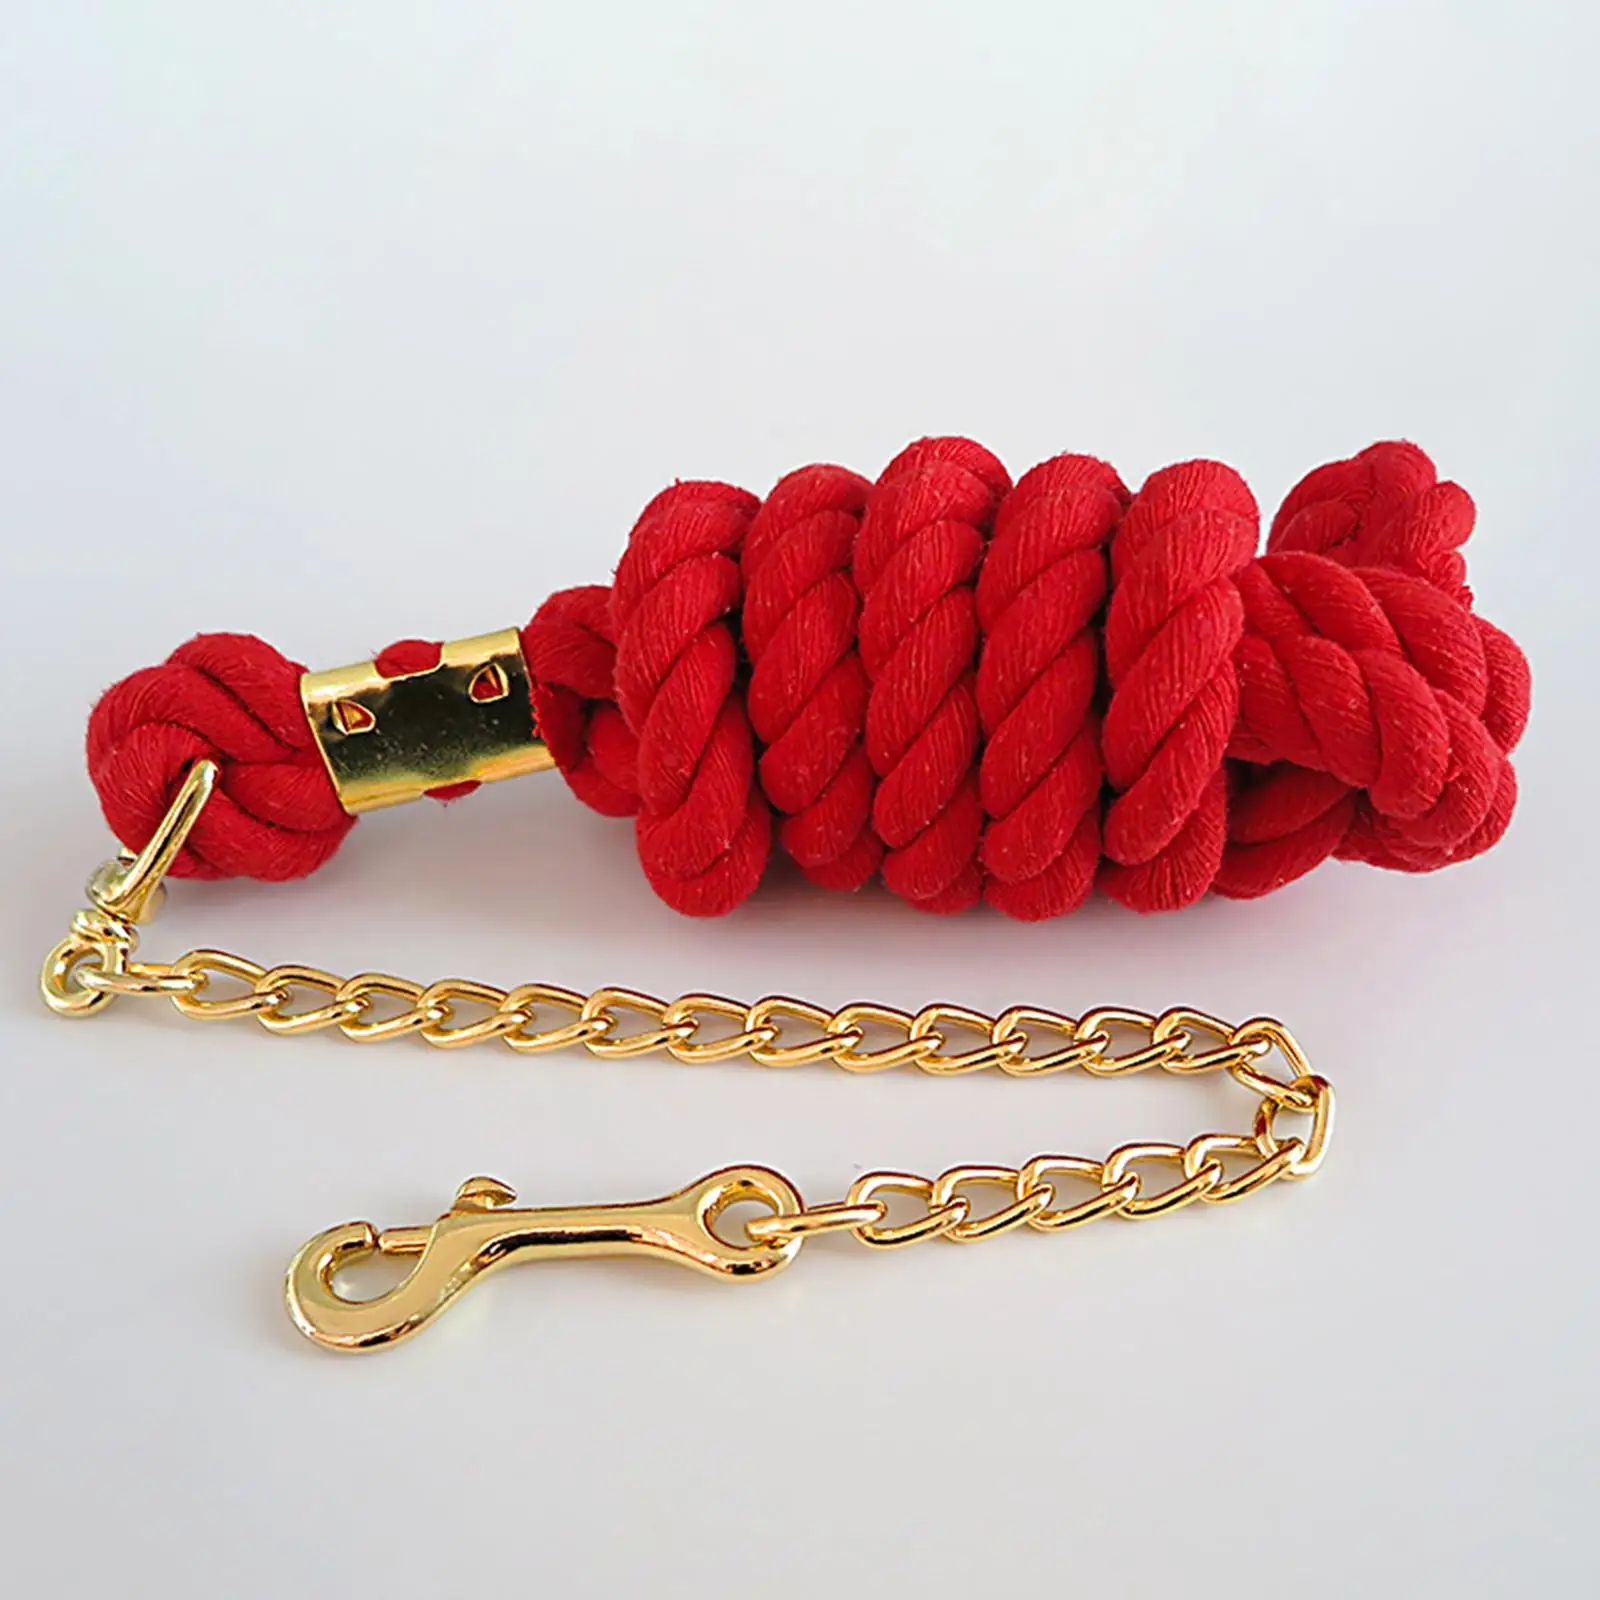 Braided   Leading Rope with Chain Snap Accessory